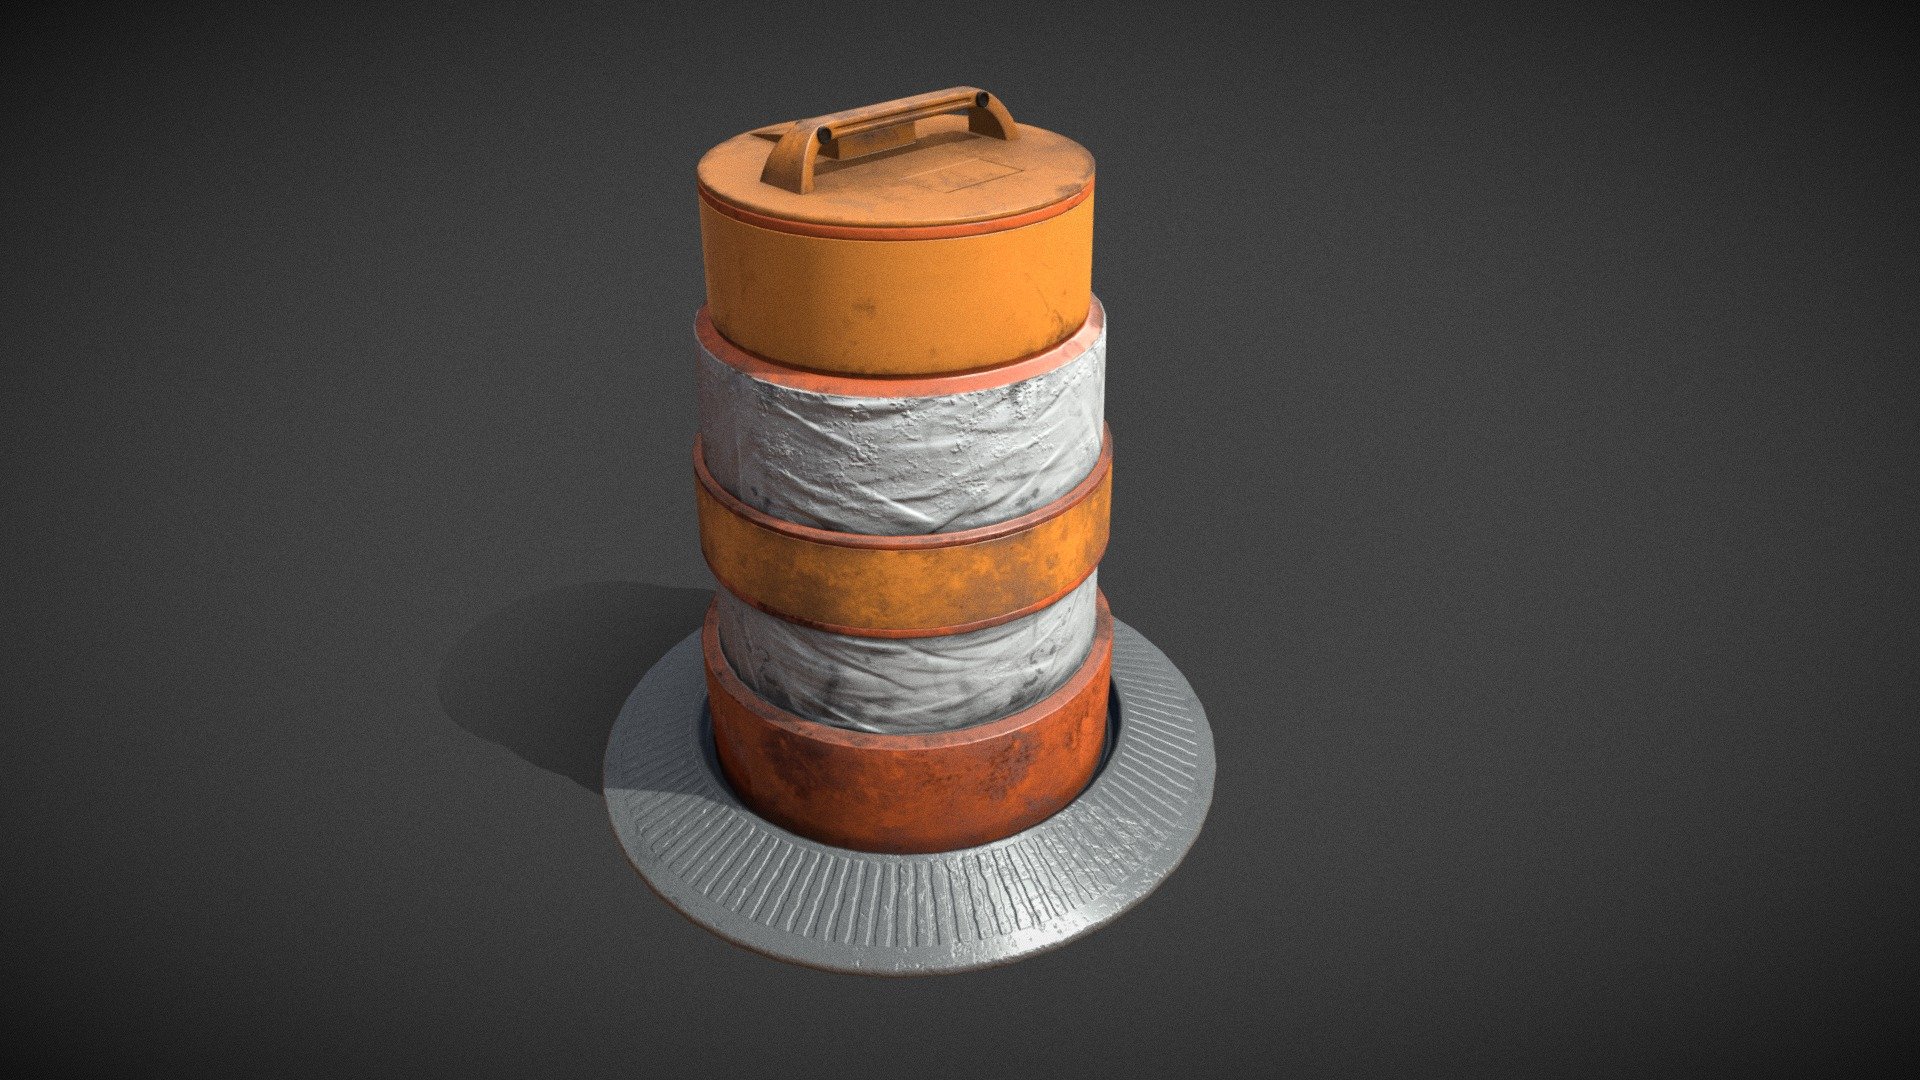 A simple and realistic traffic barrier barrel

Feel free to follow my social media accounts to check out my latest works!
artstation : https://www.artstation.com/artwork/1xn6y8
facebook : https://www.facebook.com/JOYlenCE/
Twitter : https://twitter.com/LaSamFish - traffic barrier barrel - Download Free 3D model by LaSamFish/辣鹹魚 (@lasamfish) 3d model